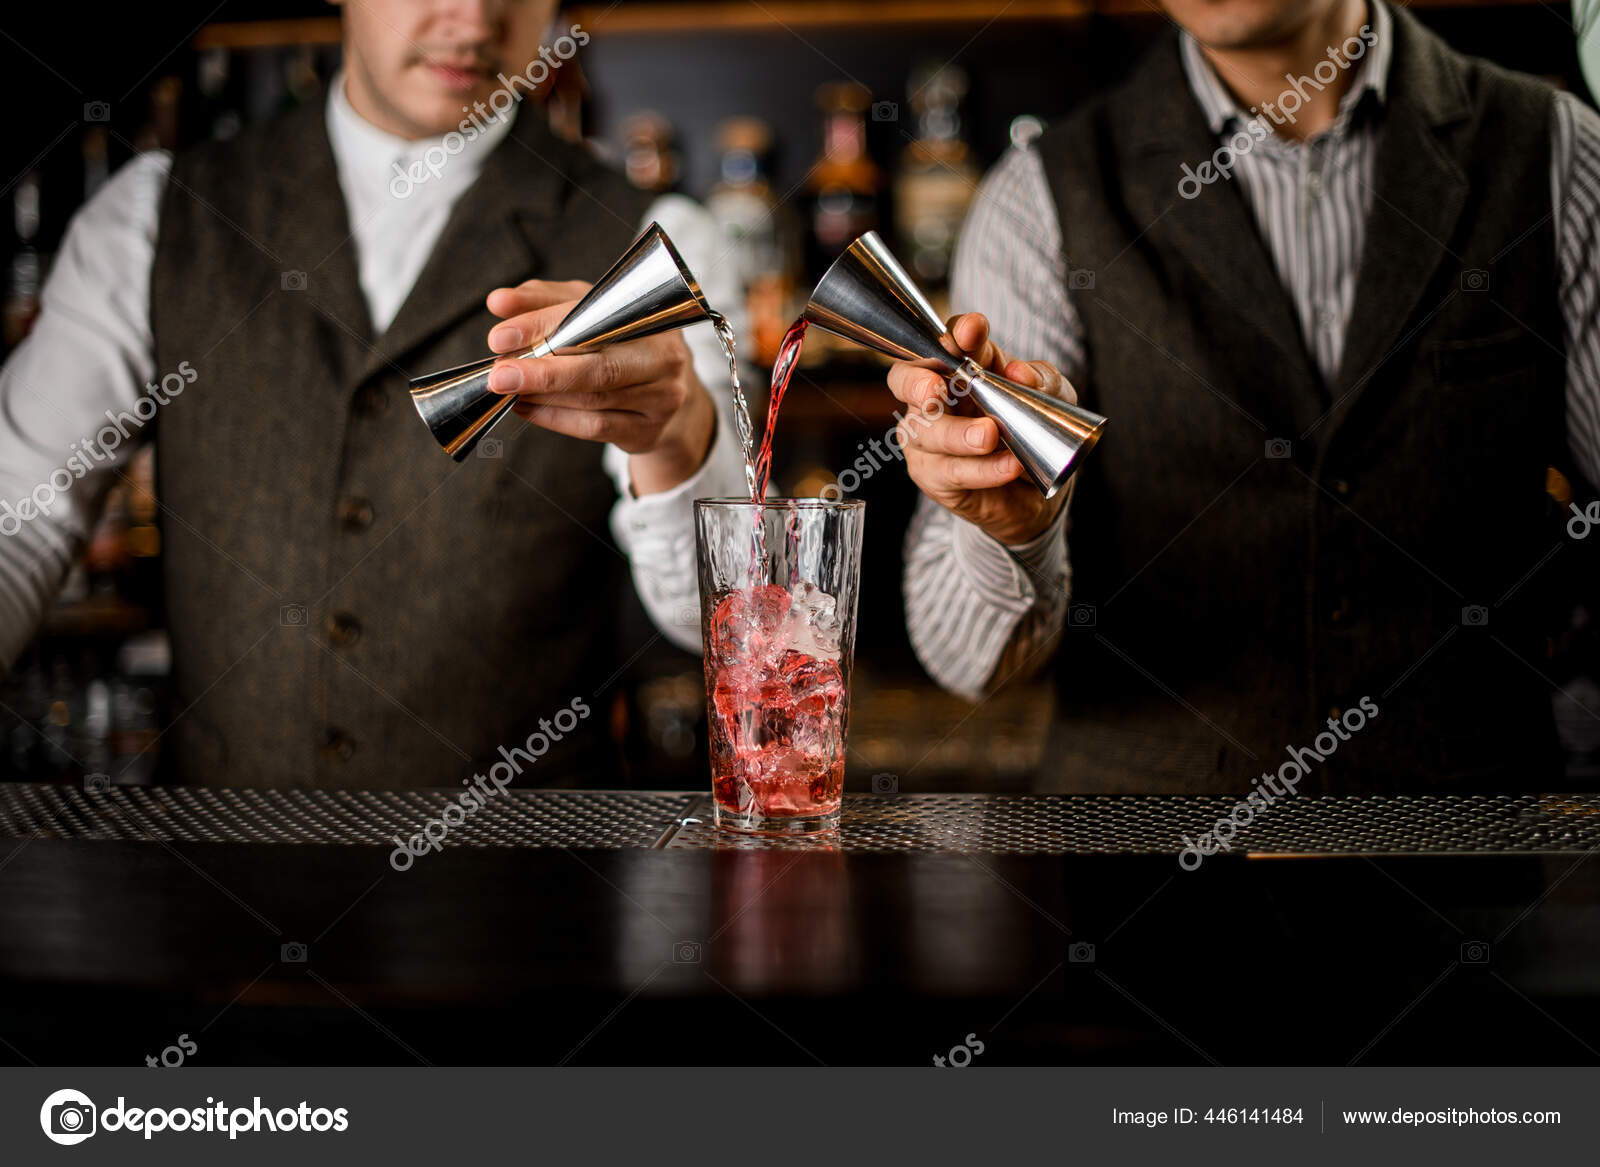 Bartender Holds In Hand Steel Jigger And Pours Drink From Bottle